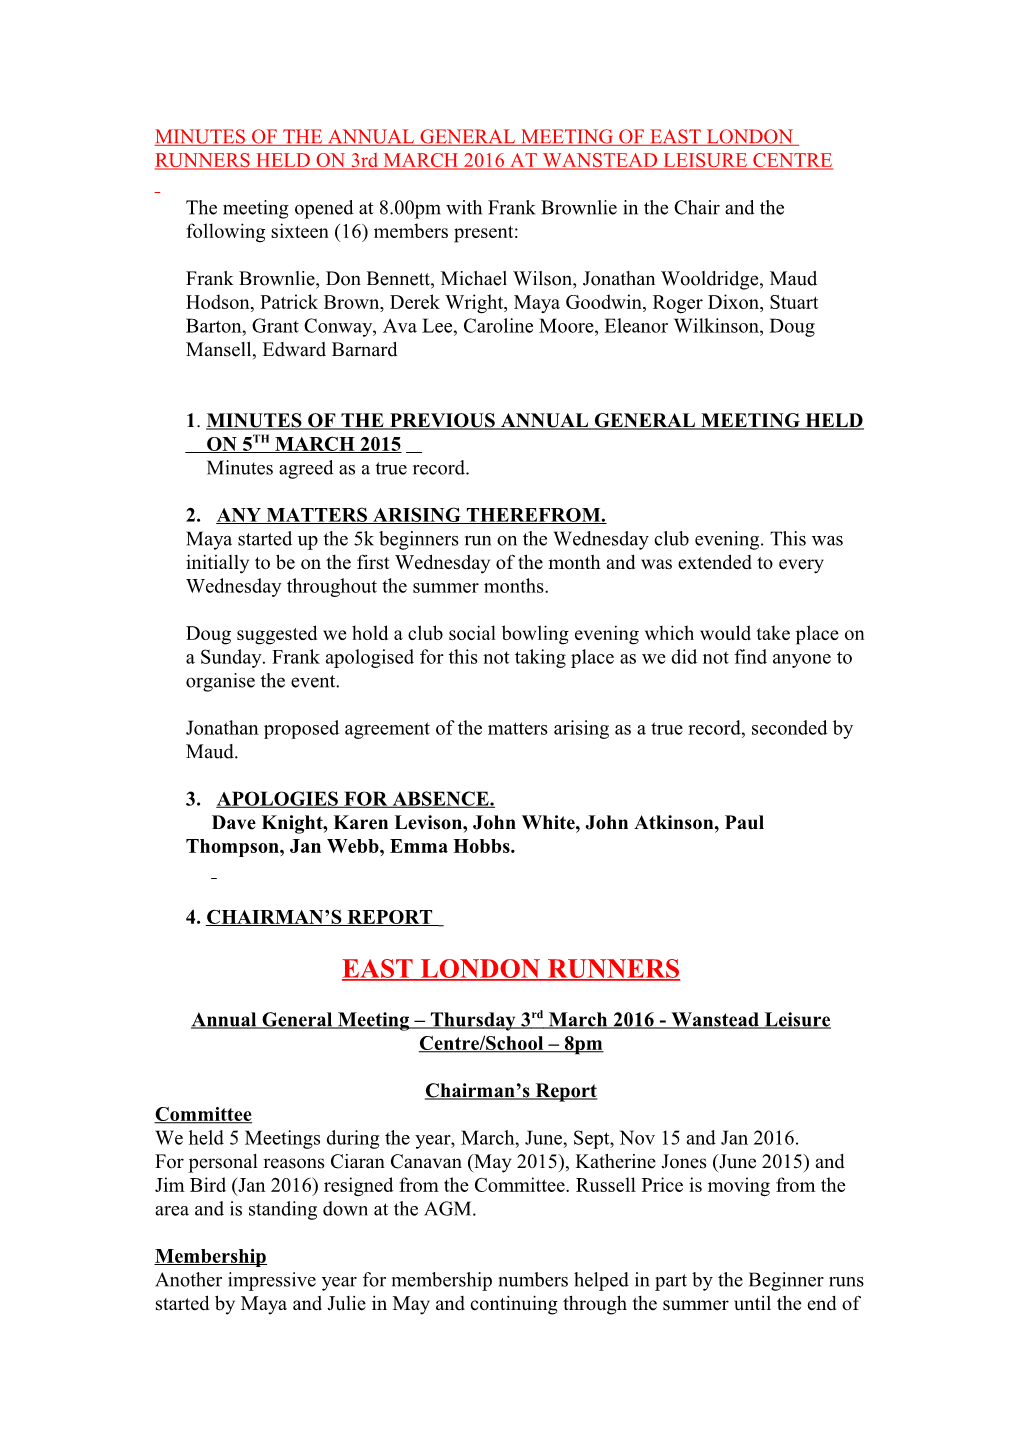 Minutes of the Annual General Meeting of East London Runners Held on 6Th March 2014 At